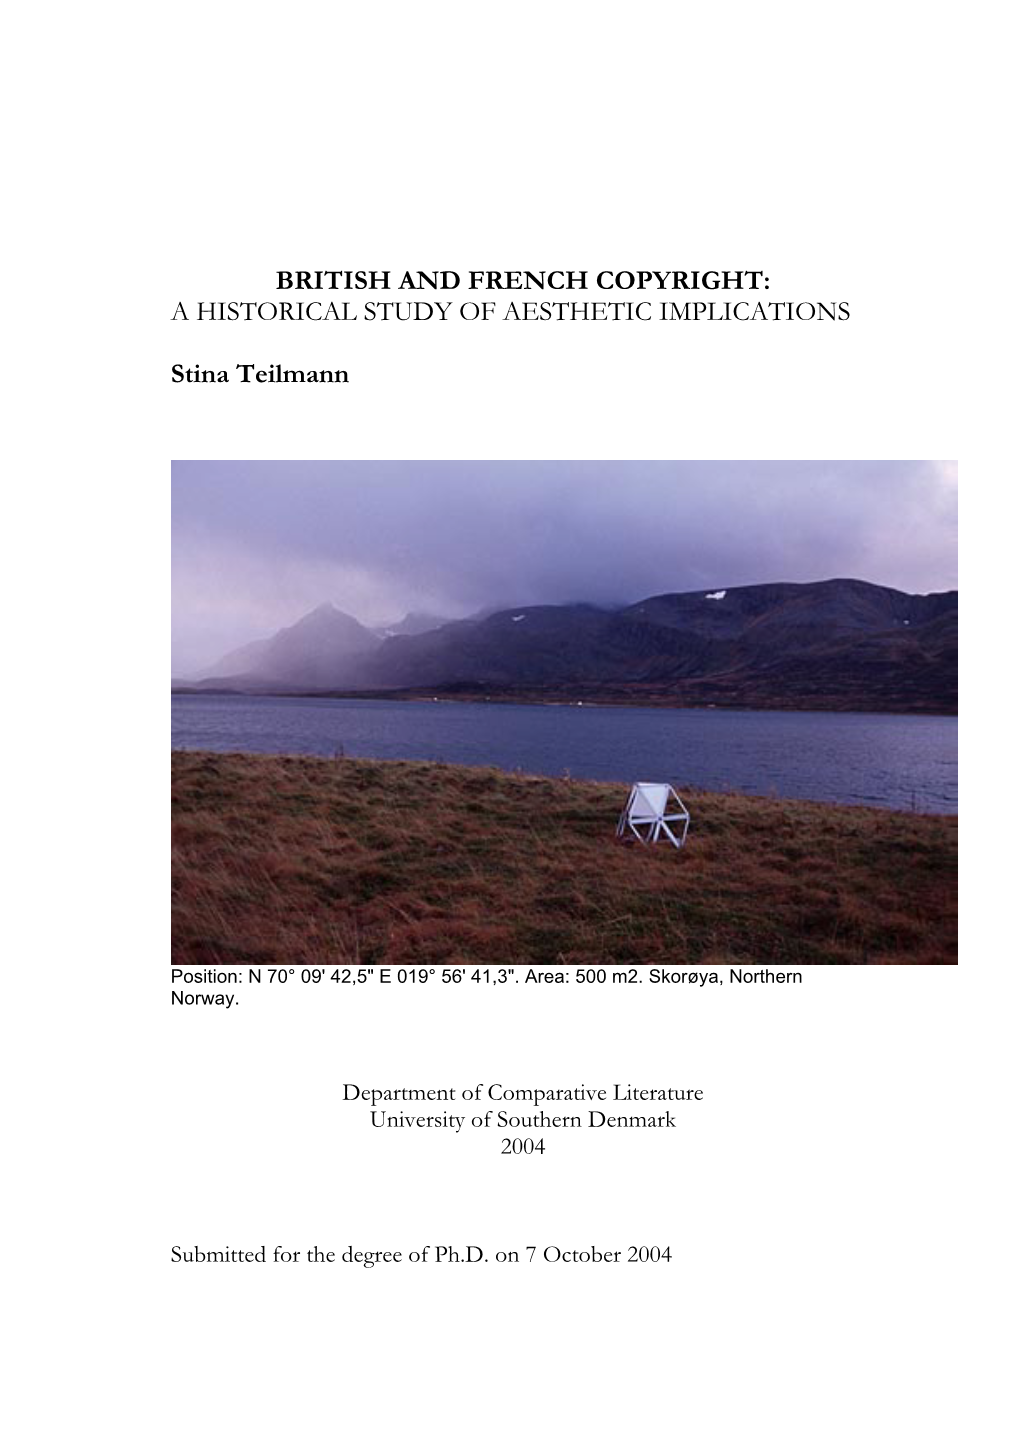 British and French Copyright: a Historical Study of Aesthetic Implications